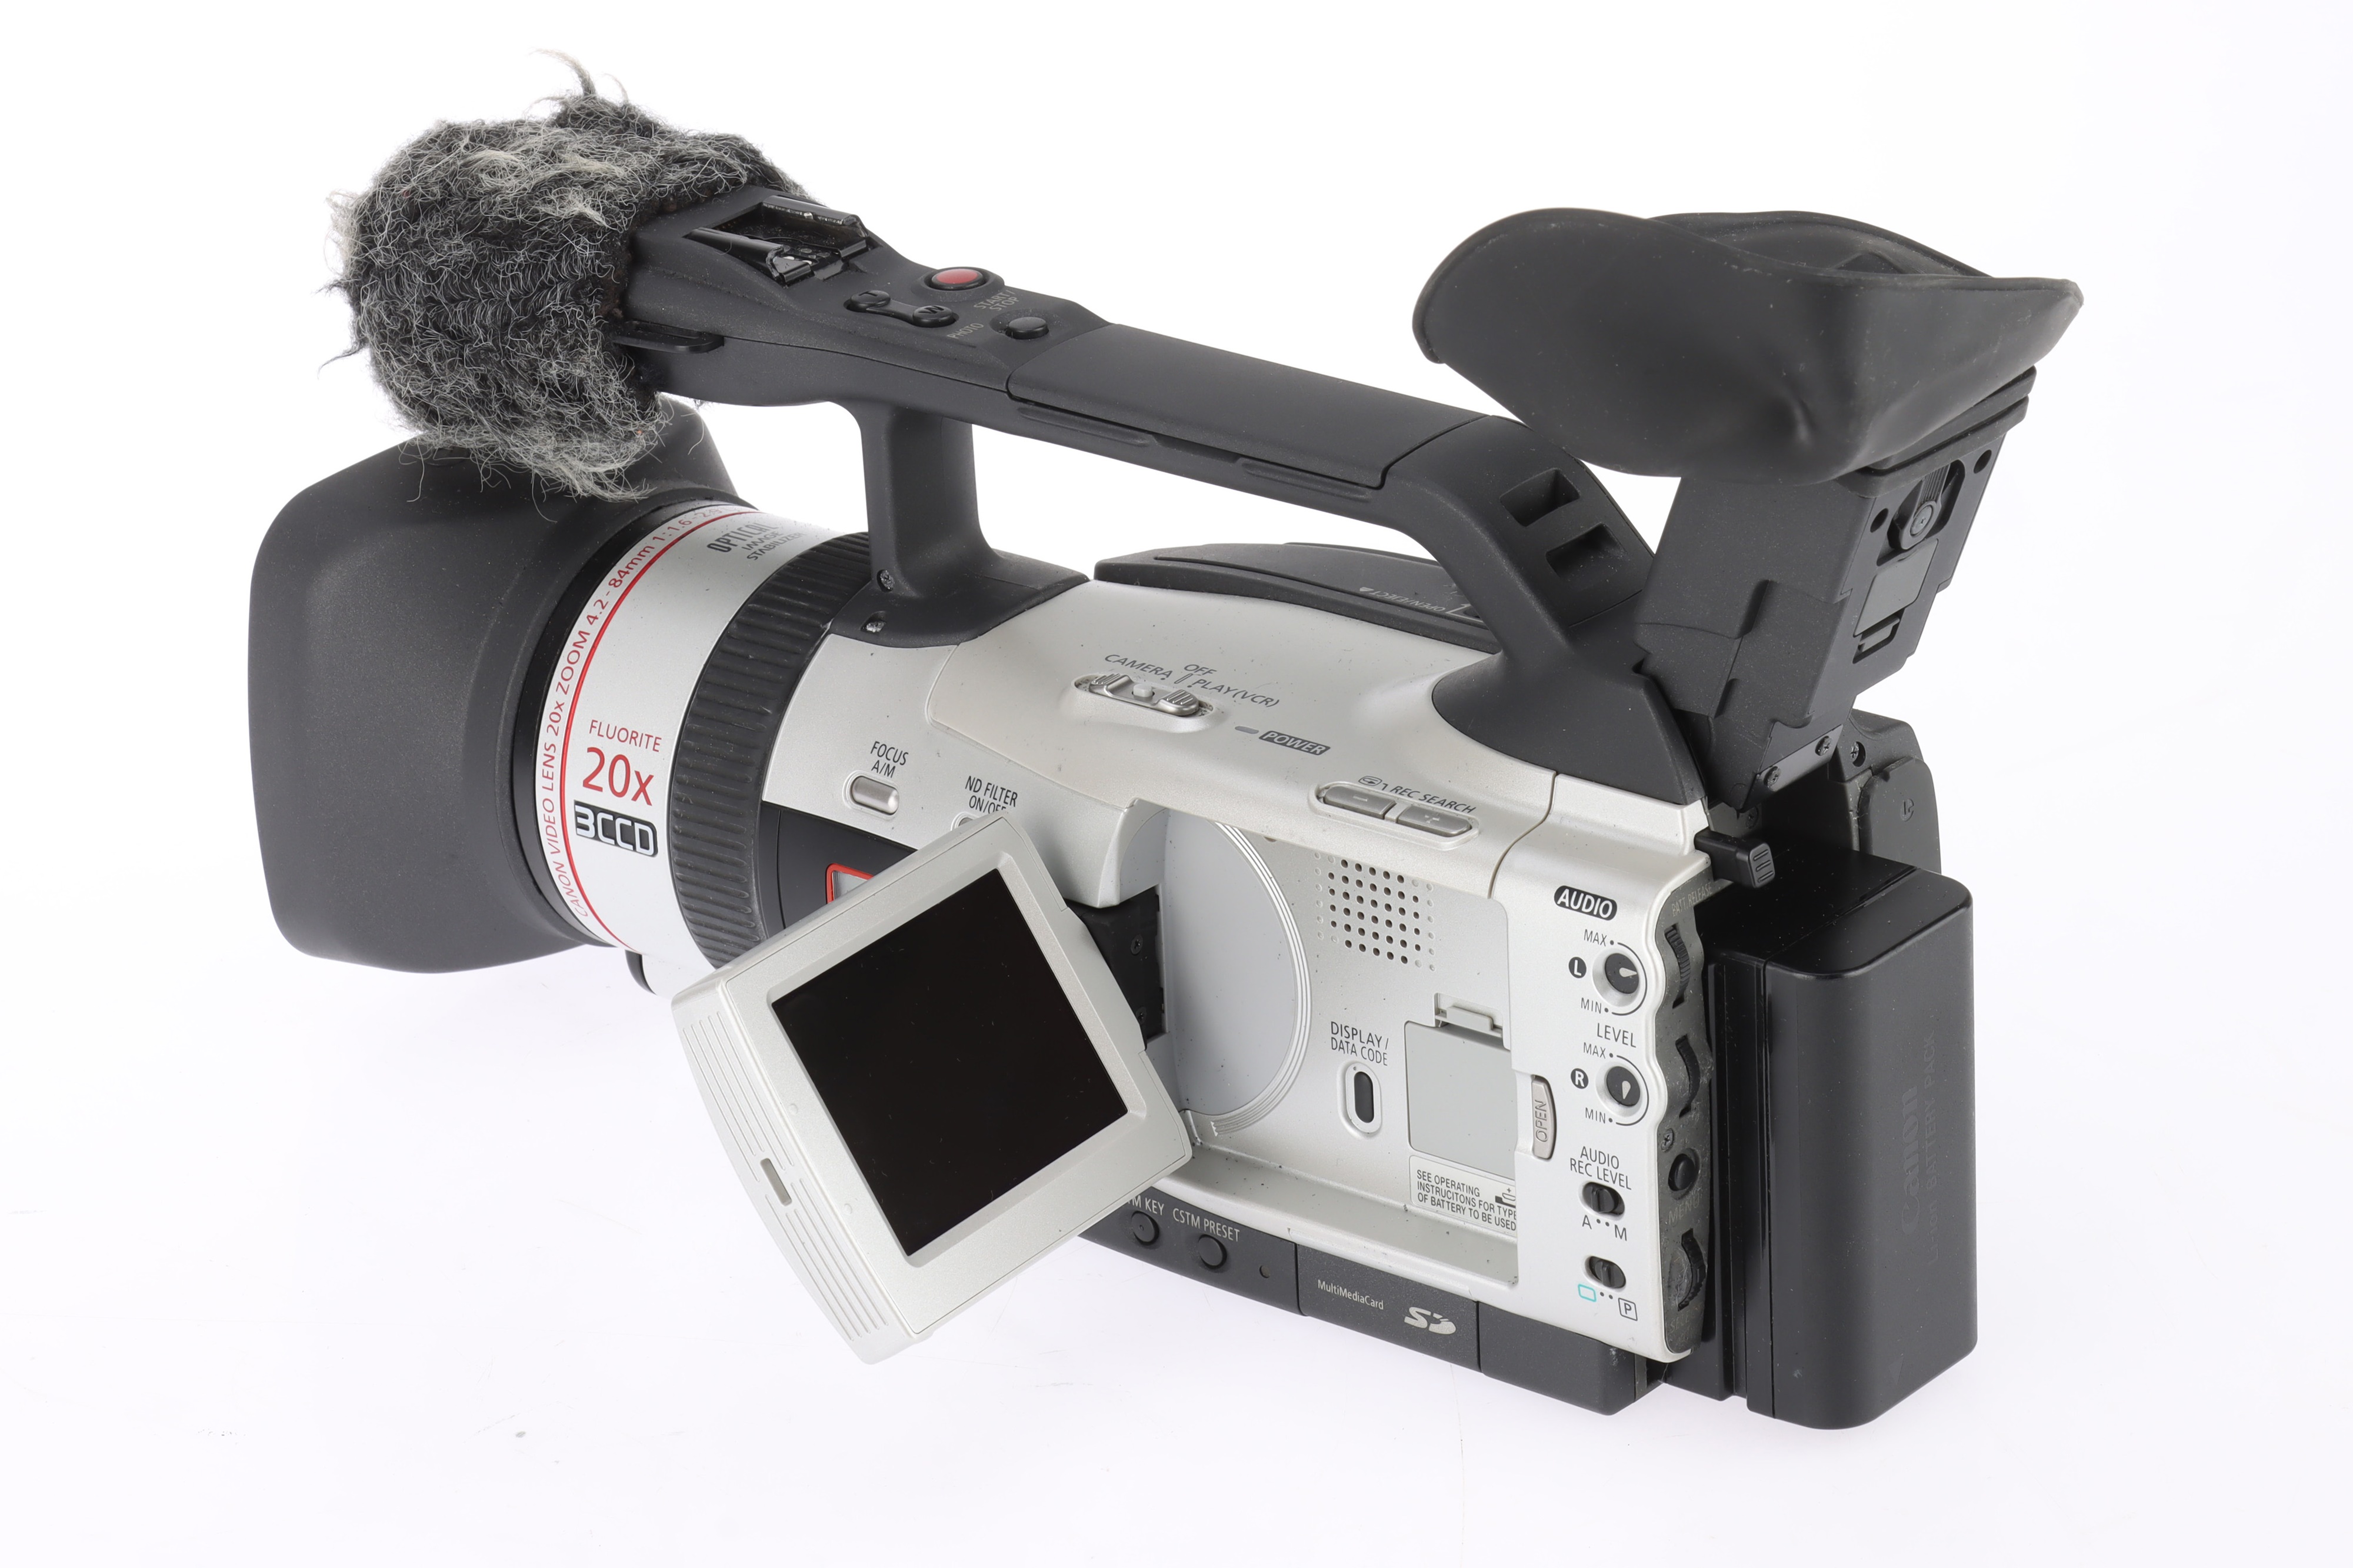 A Canon XM2 3CCD Digital Video Camcorder, - Image 3 of 4